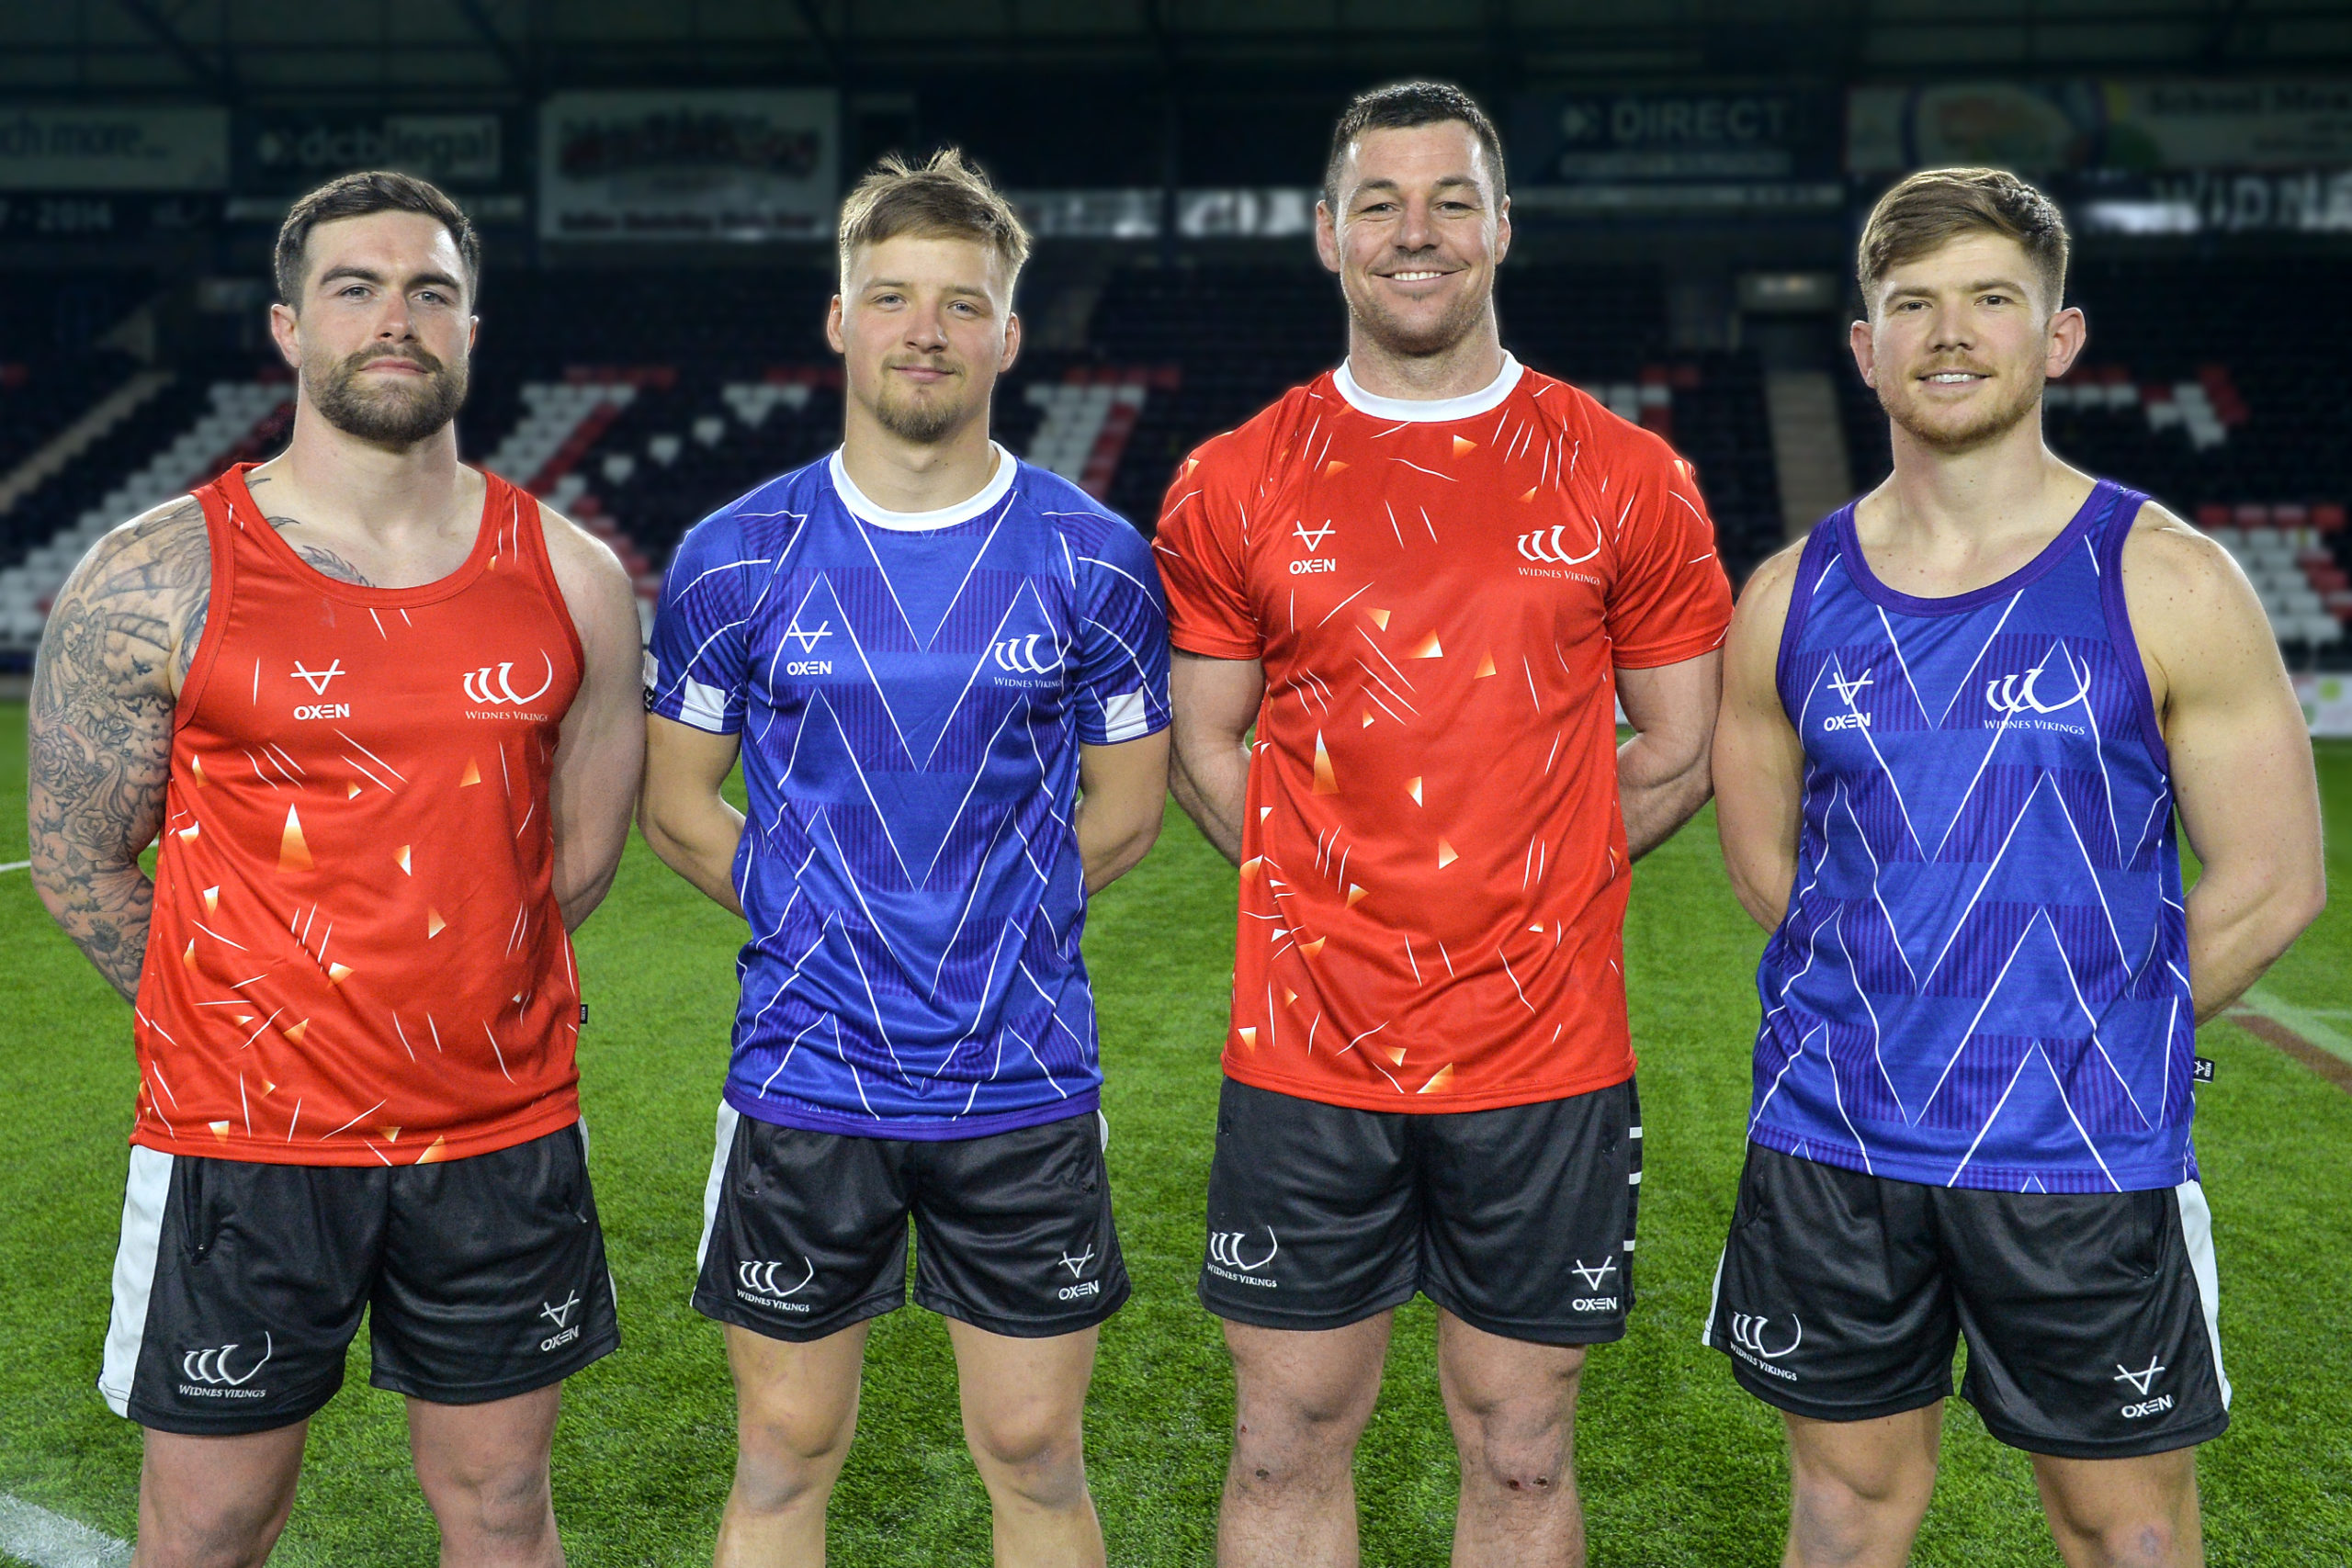 Widnes Vikings launch special edition red and blue shirts ahead of Merseyside derby